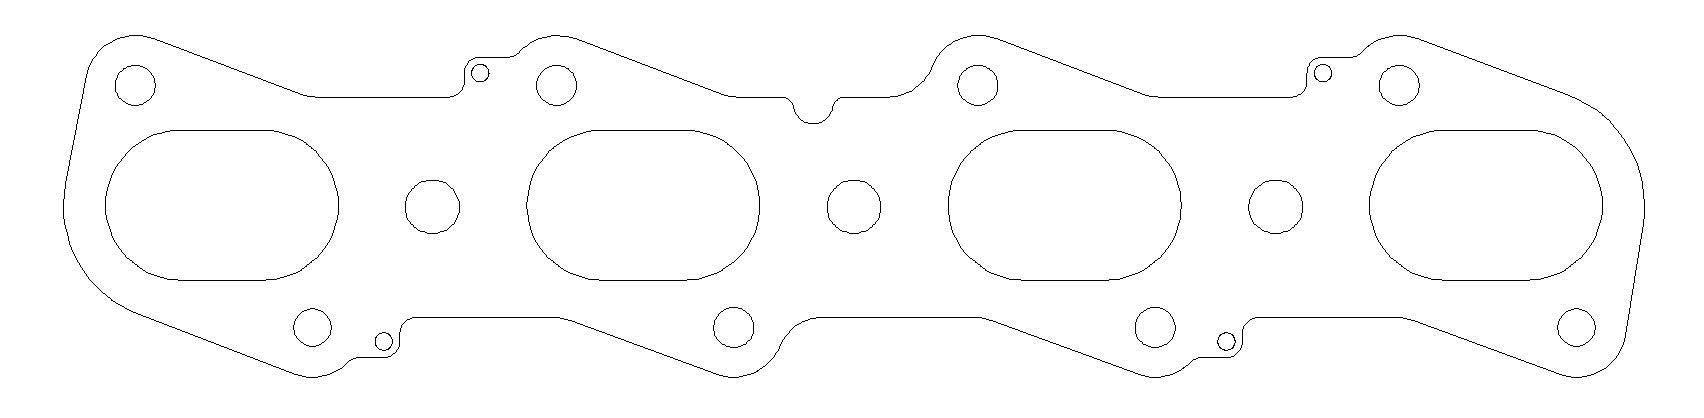 MLS Exhaust Gasket Set Ford 5.4L Shelby 2007 - Burlile Performance Products